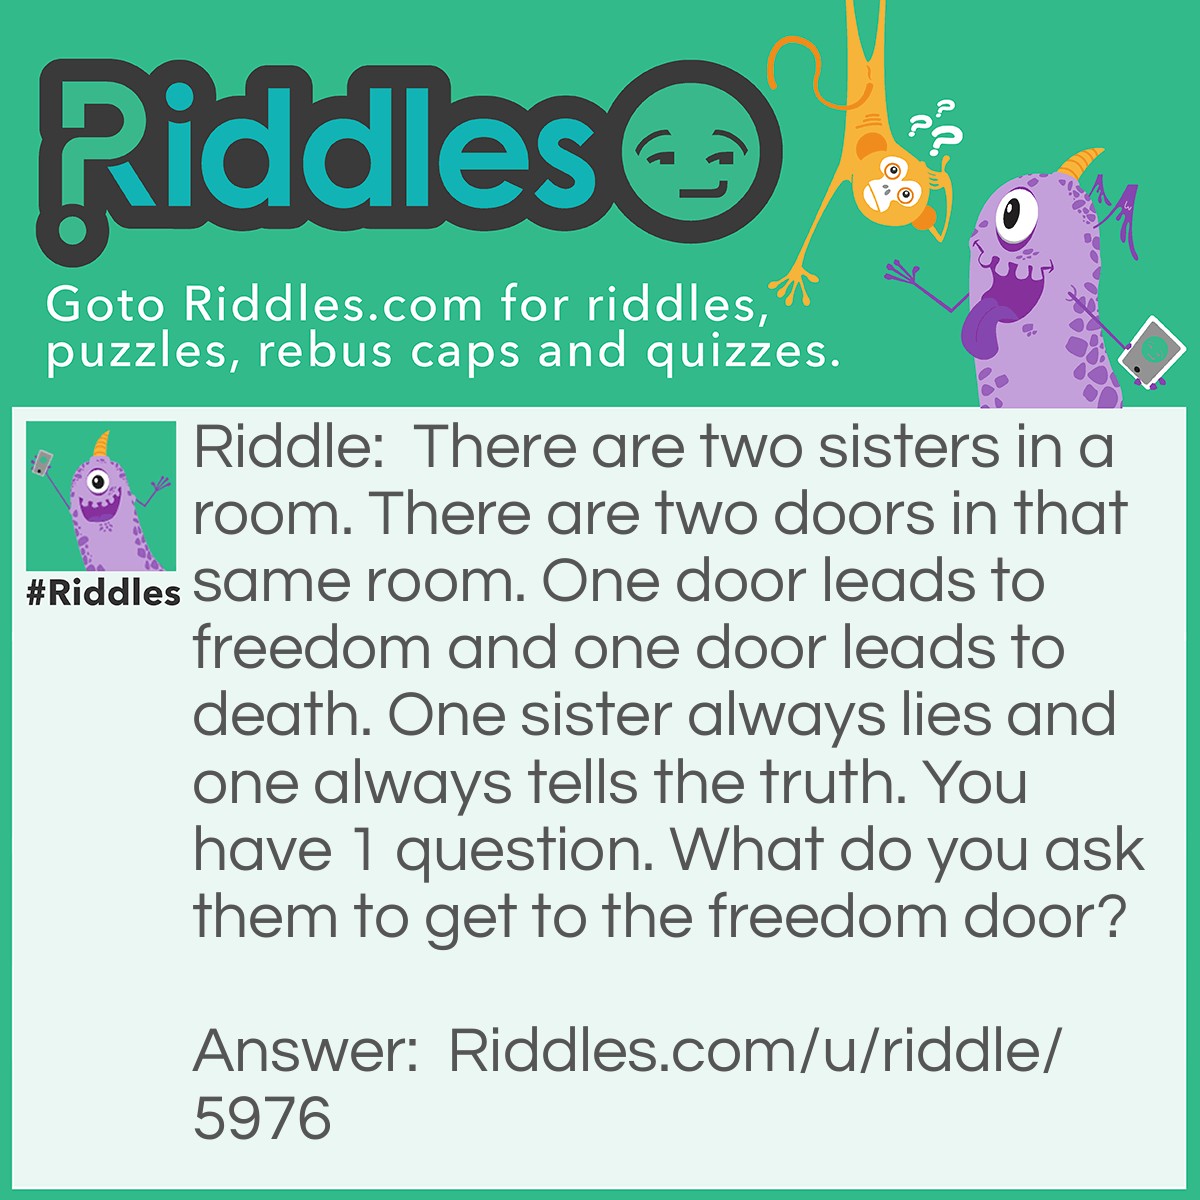 Riddle: There are two sisters in a room. There are two doors in that same room. One door leads to freedom and one door leads to death. One sister always lies and one always tells the truth. You have 1 question. What do you ask them to get to the freedom door? Answer: Which door would your sister choose?